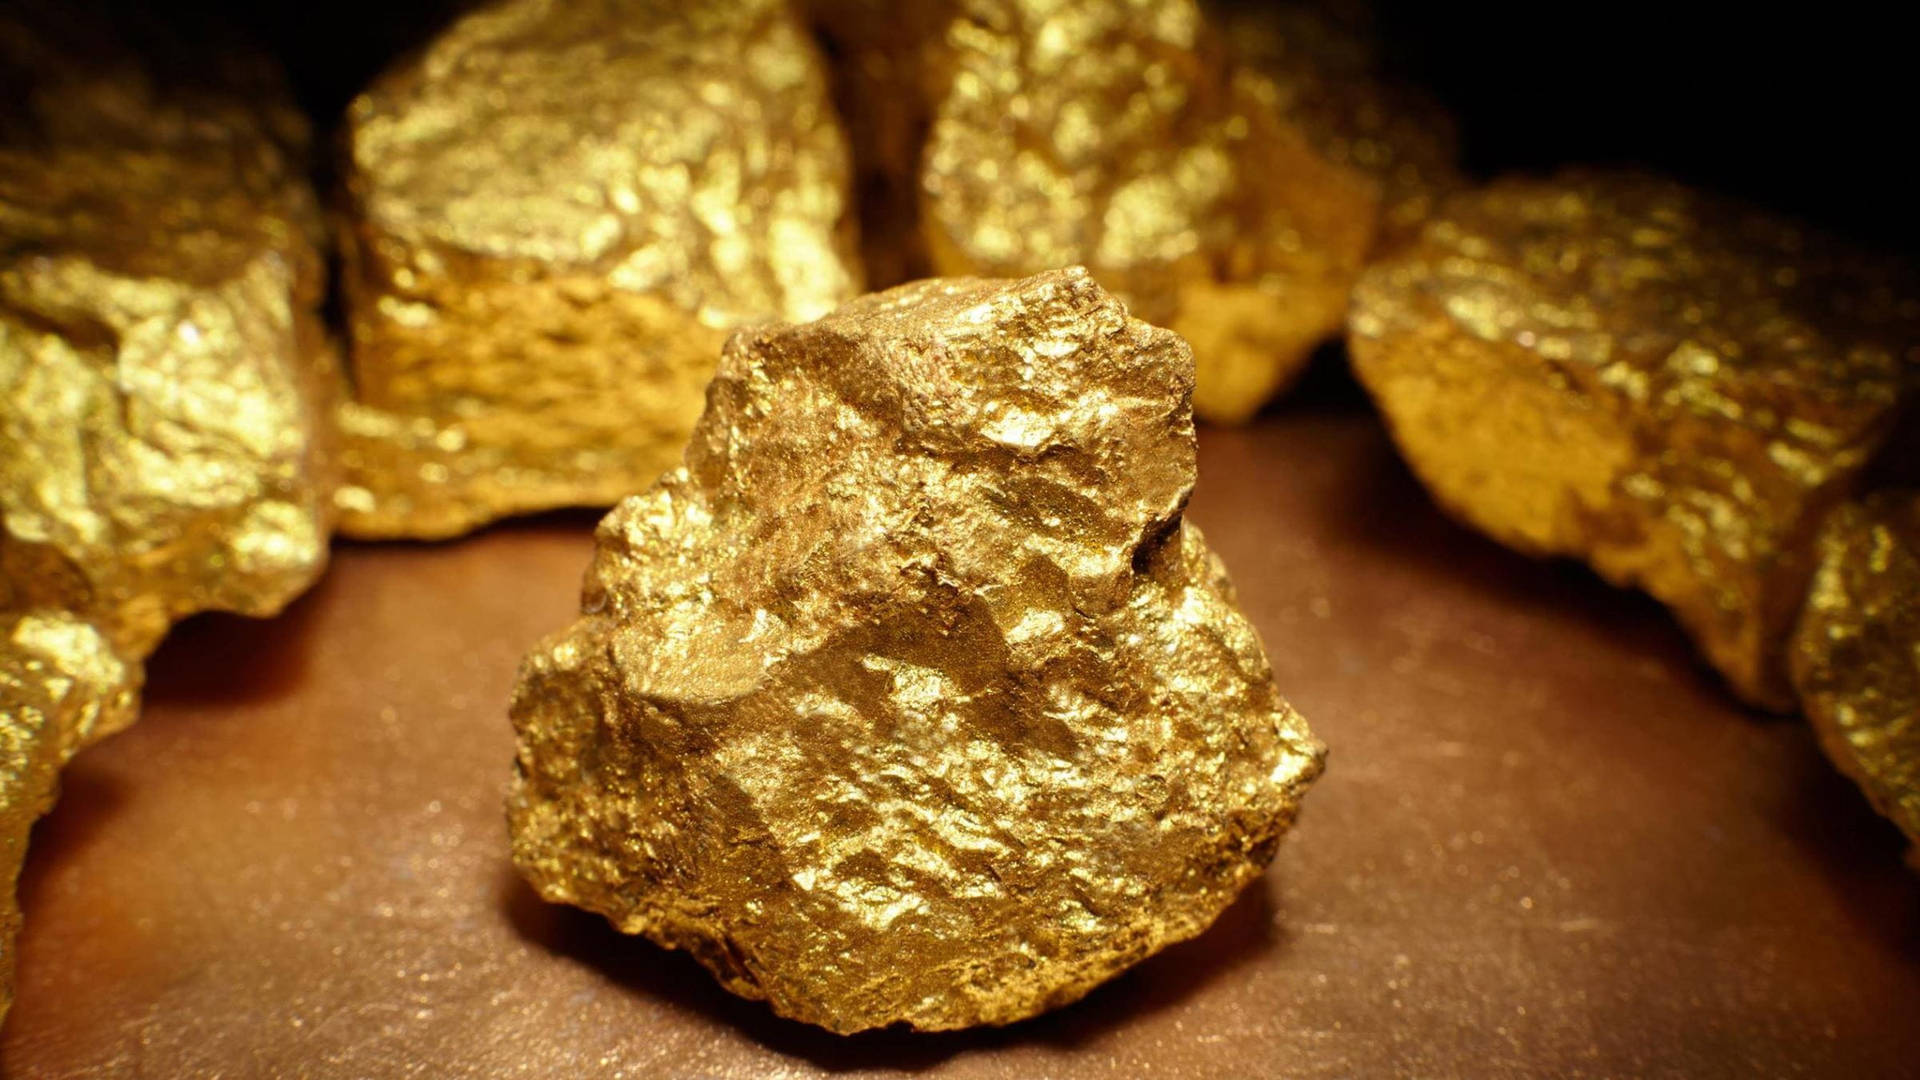 Big Gold Pieces From The Goldmines Wallpaper